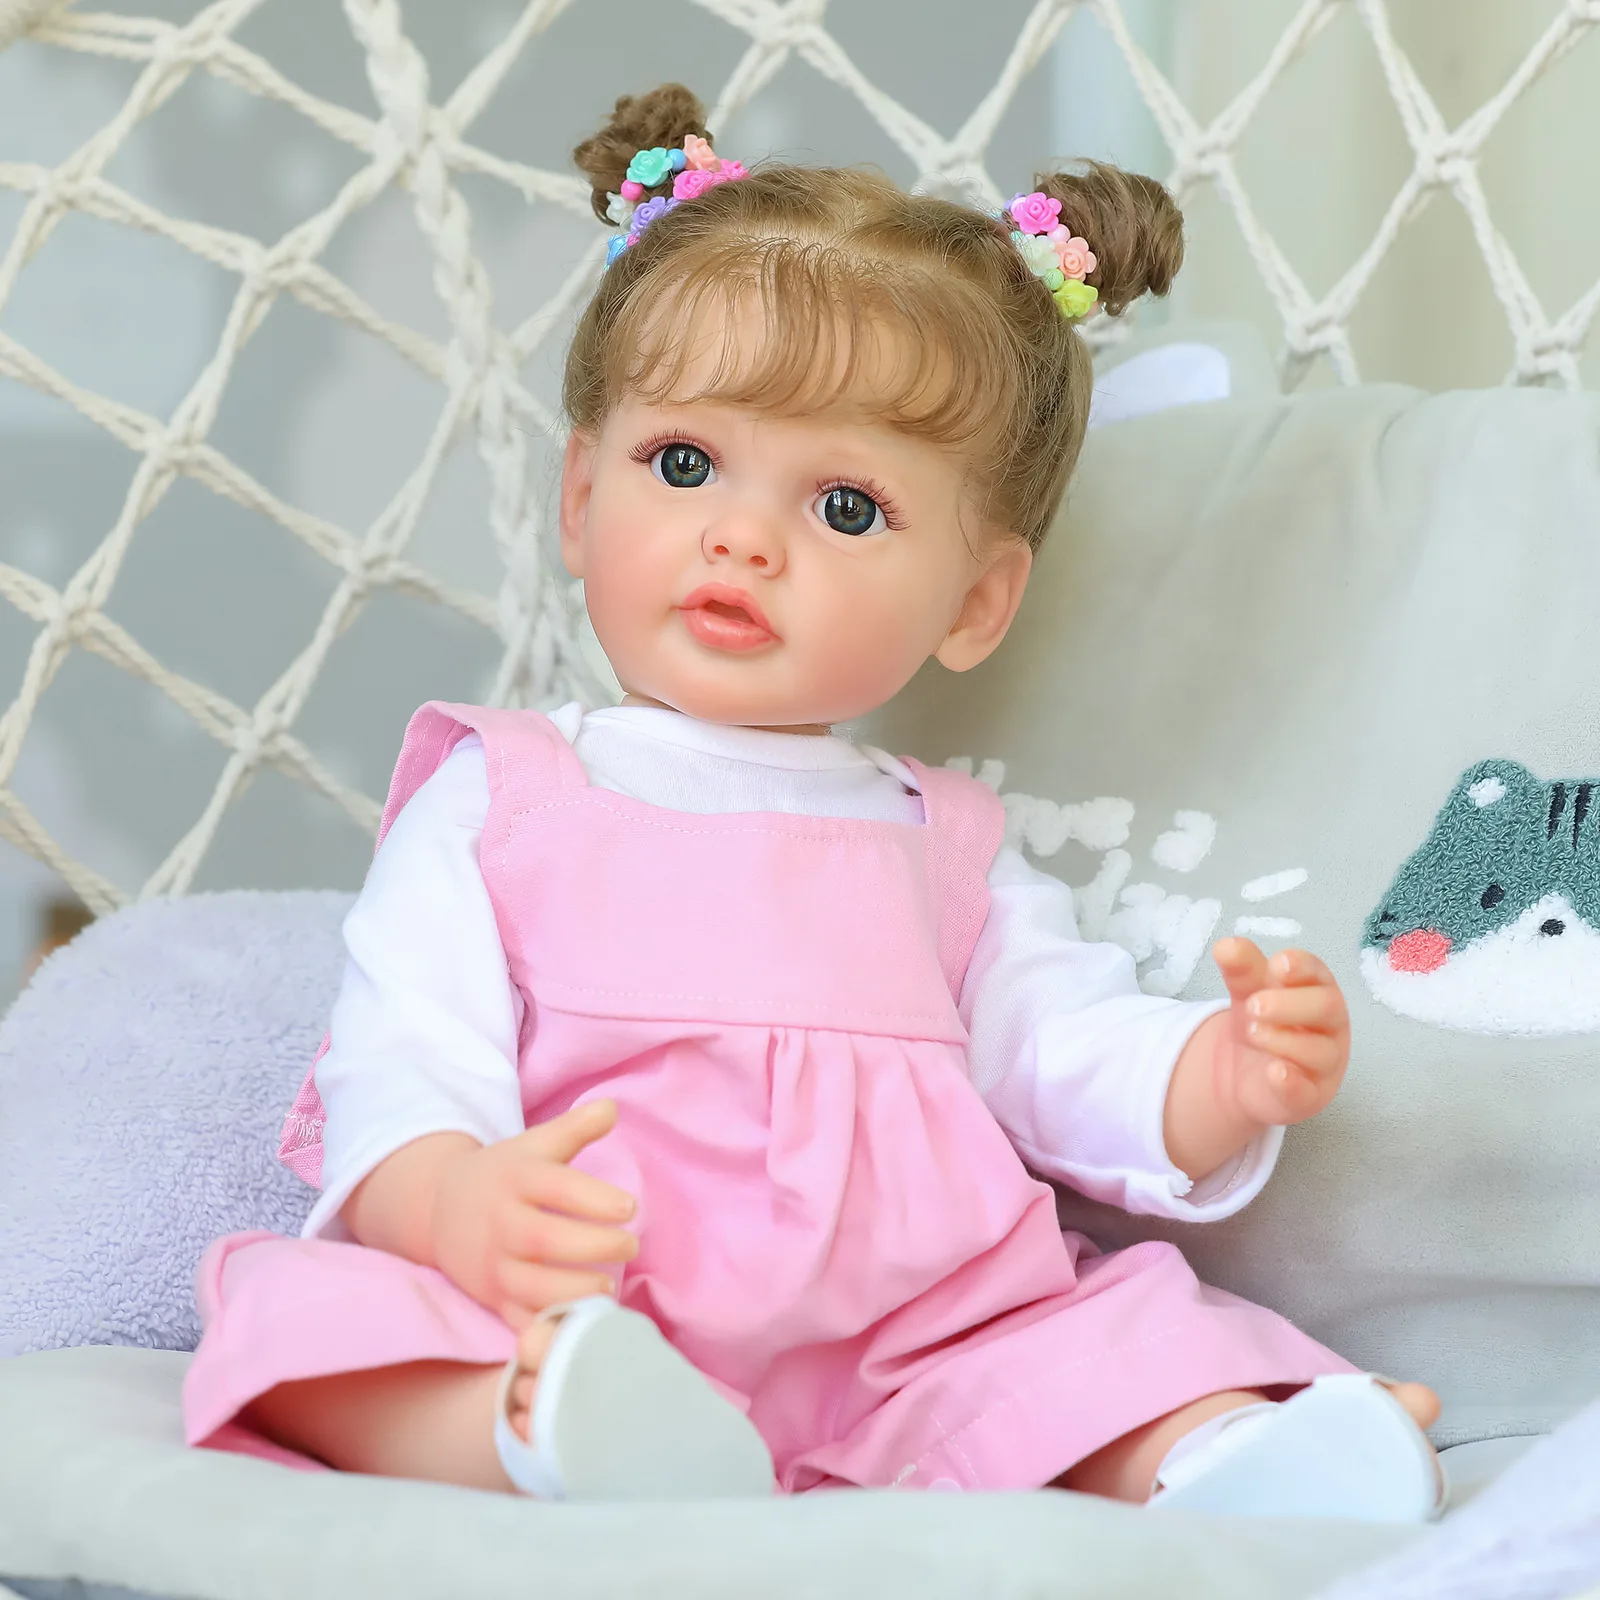 Finished Bebe Reborn Doll 55CM Reborn Baby Full Body Soft Silicone Real Touch Doll Hand Painted 3D Skin Rooted Hair Gifts Child 57cm realistic finished bebe reborn silicone vinyl body soft girl doll bebe reborn handmade toy for child christmas gift